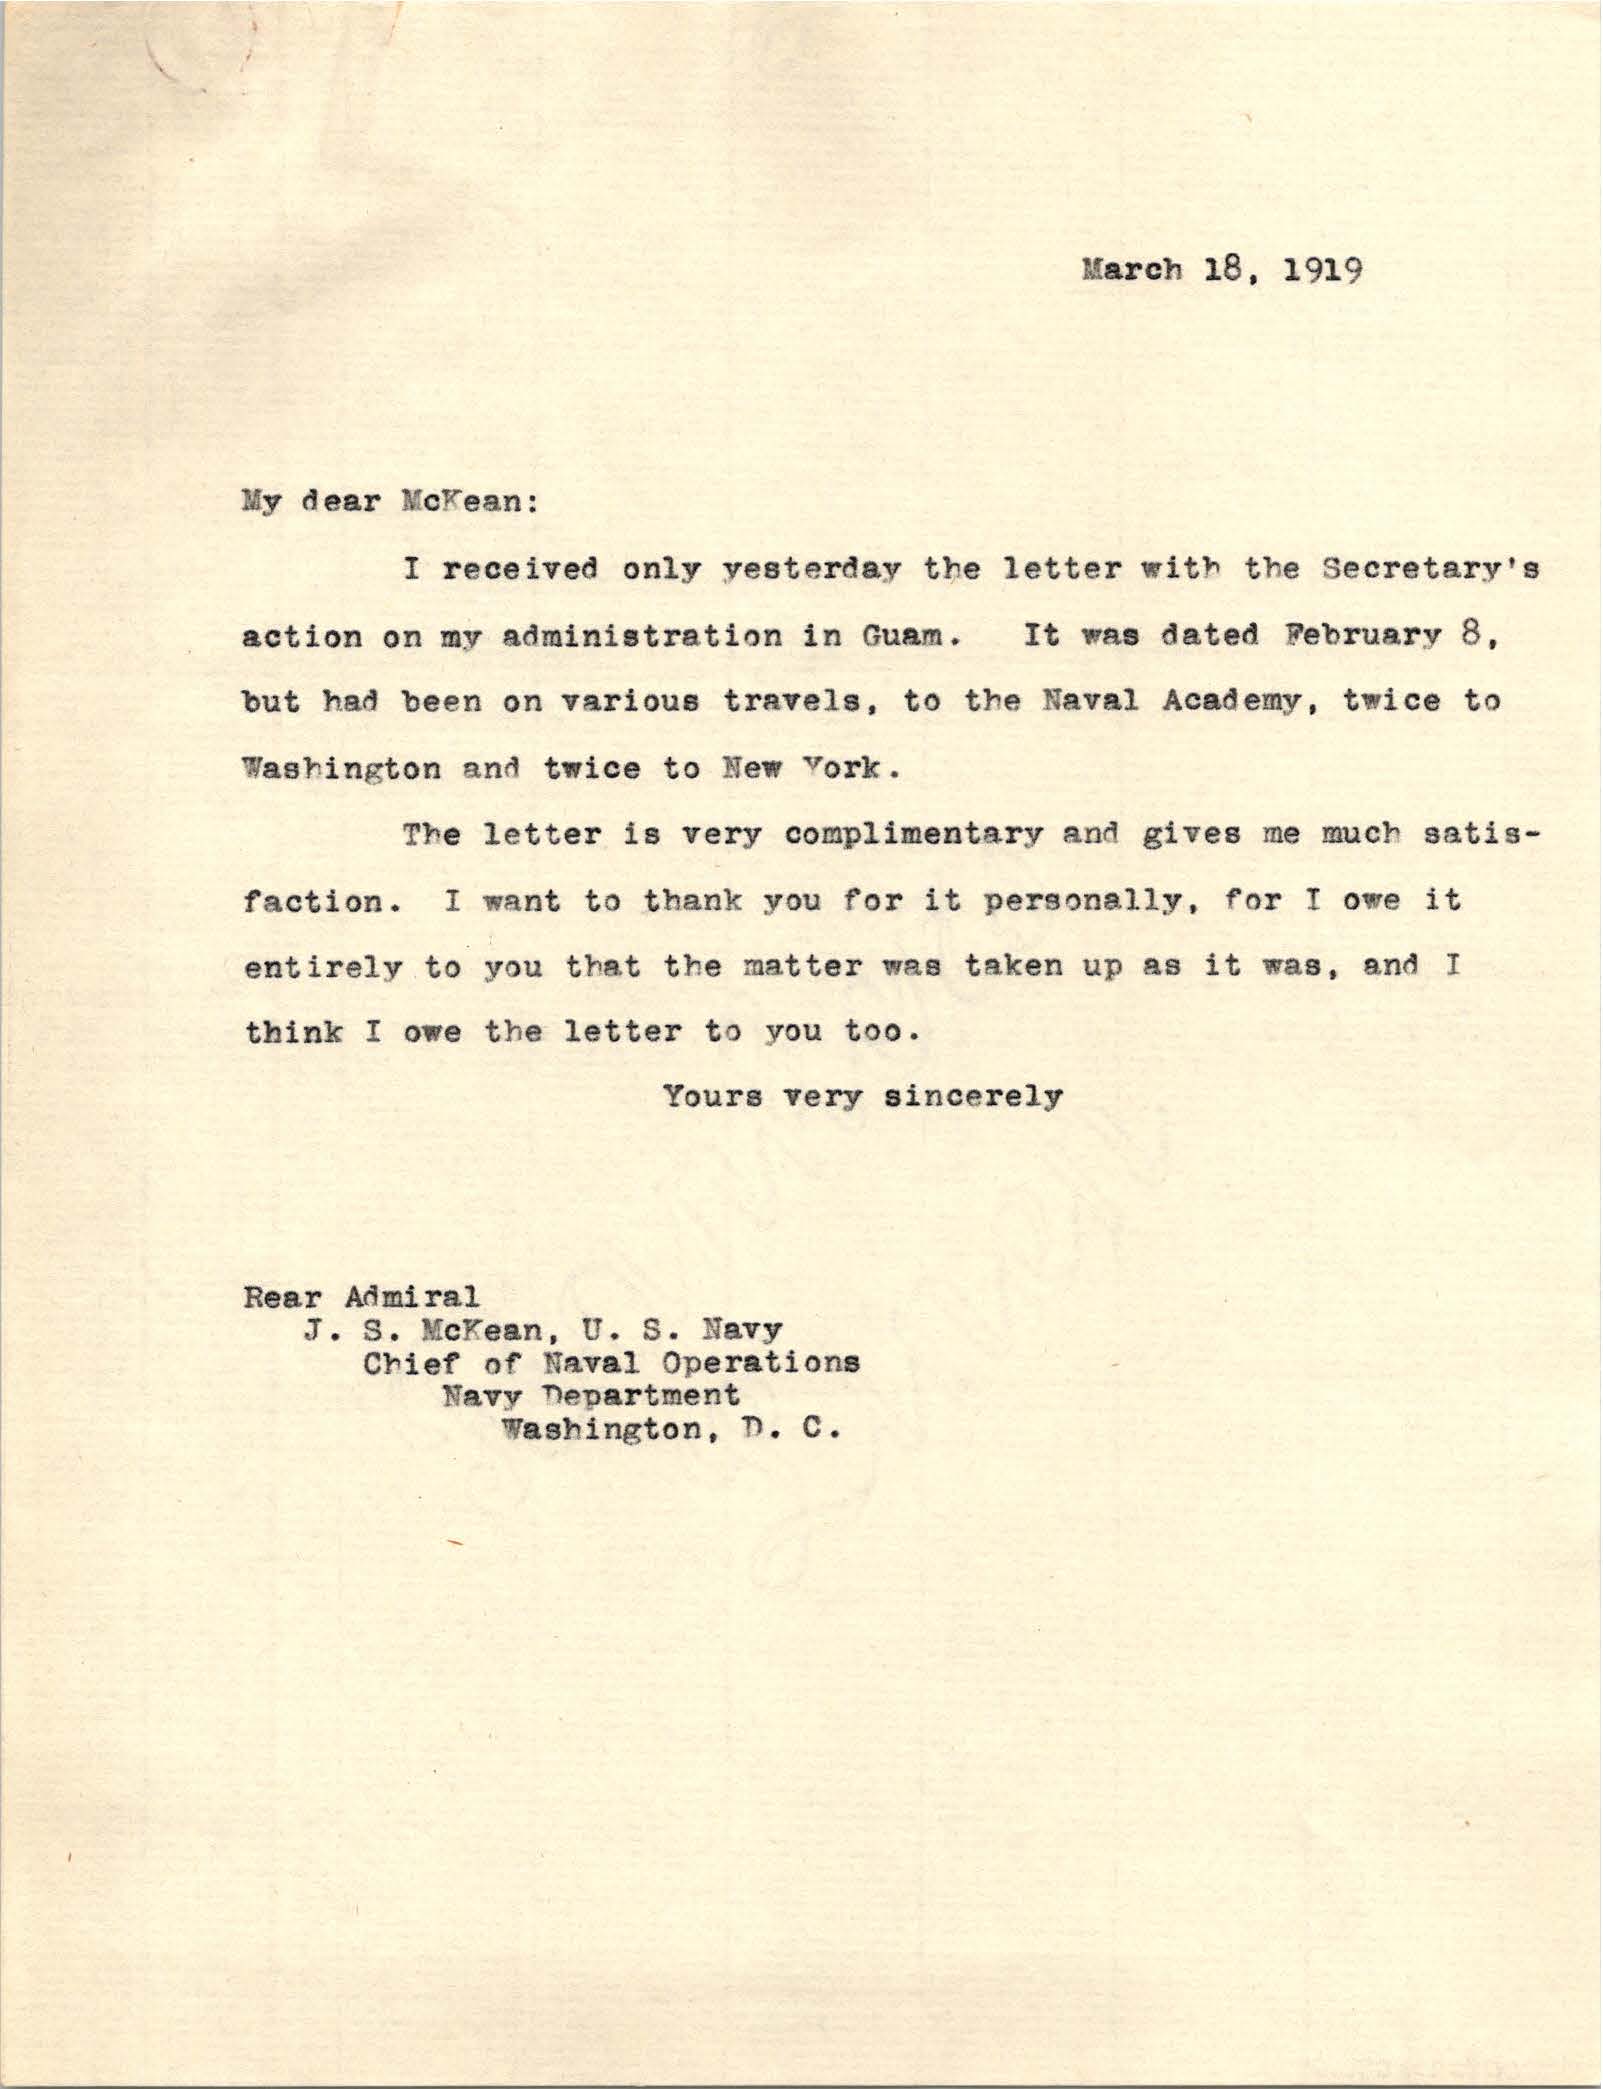 Letter from Roy Campbell Smith to J. S. McKean